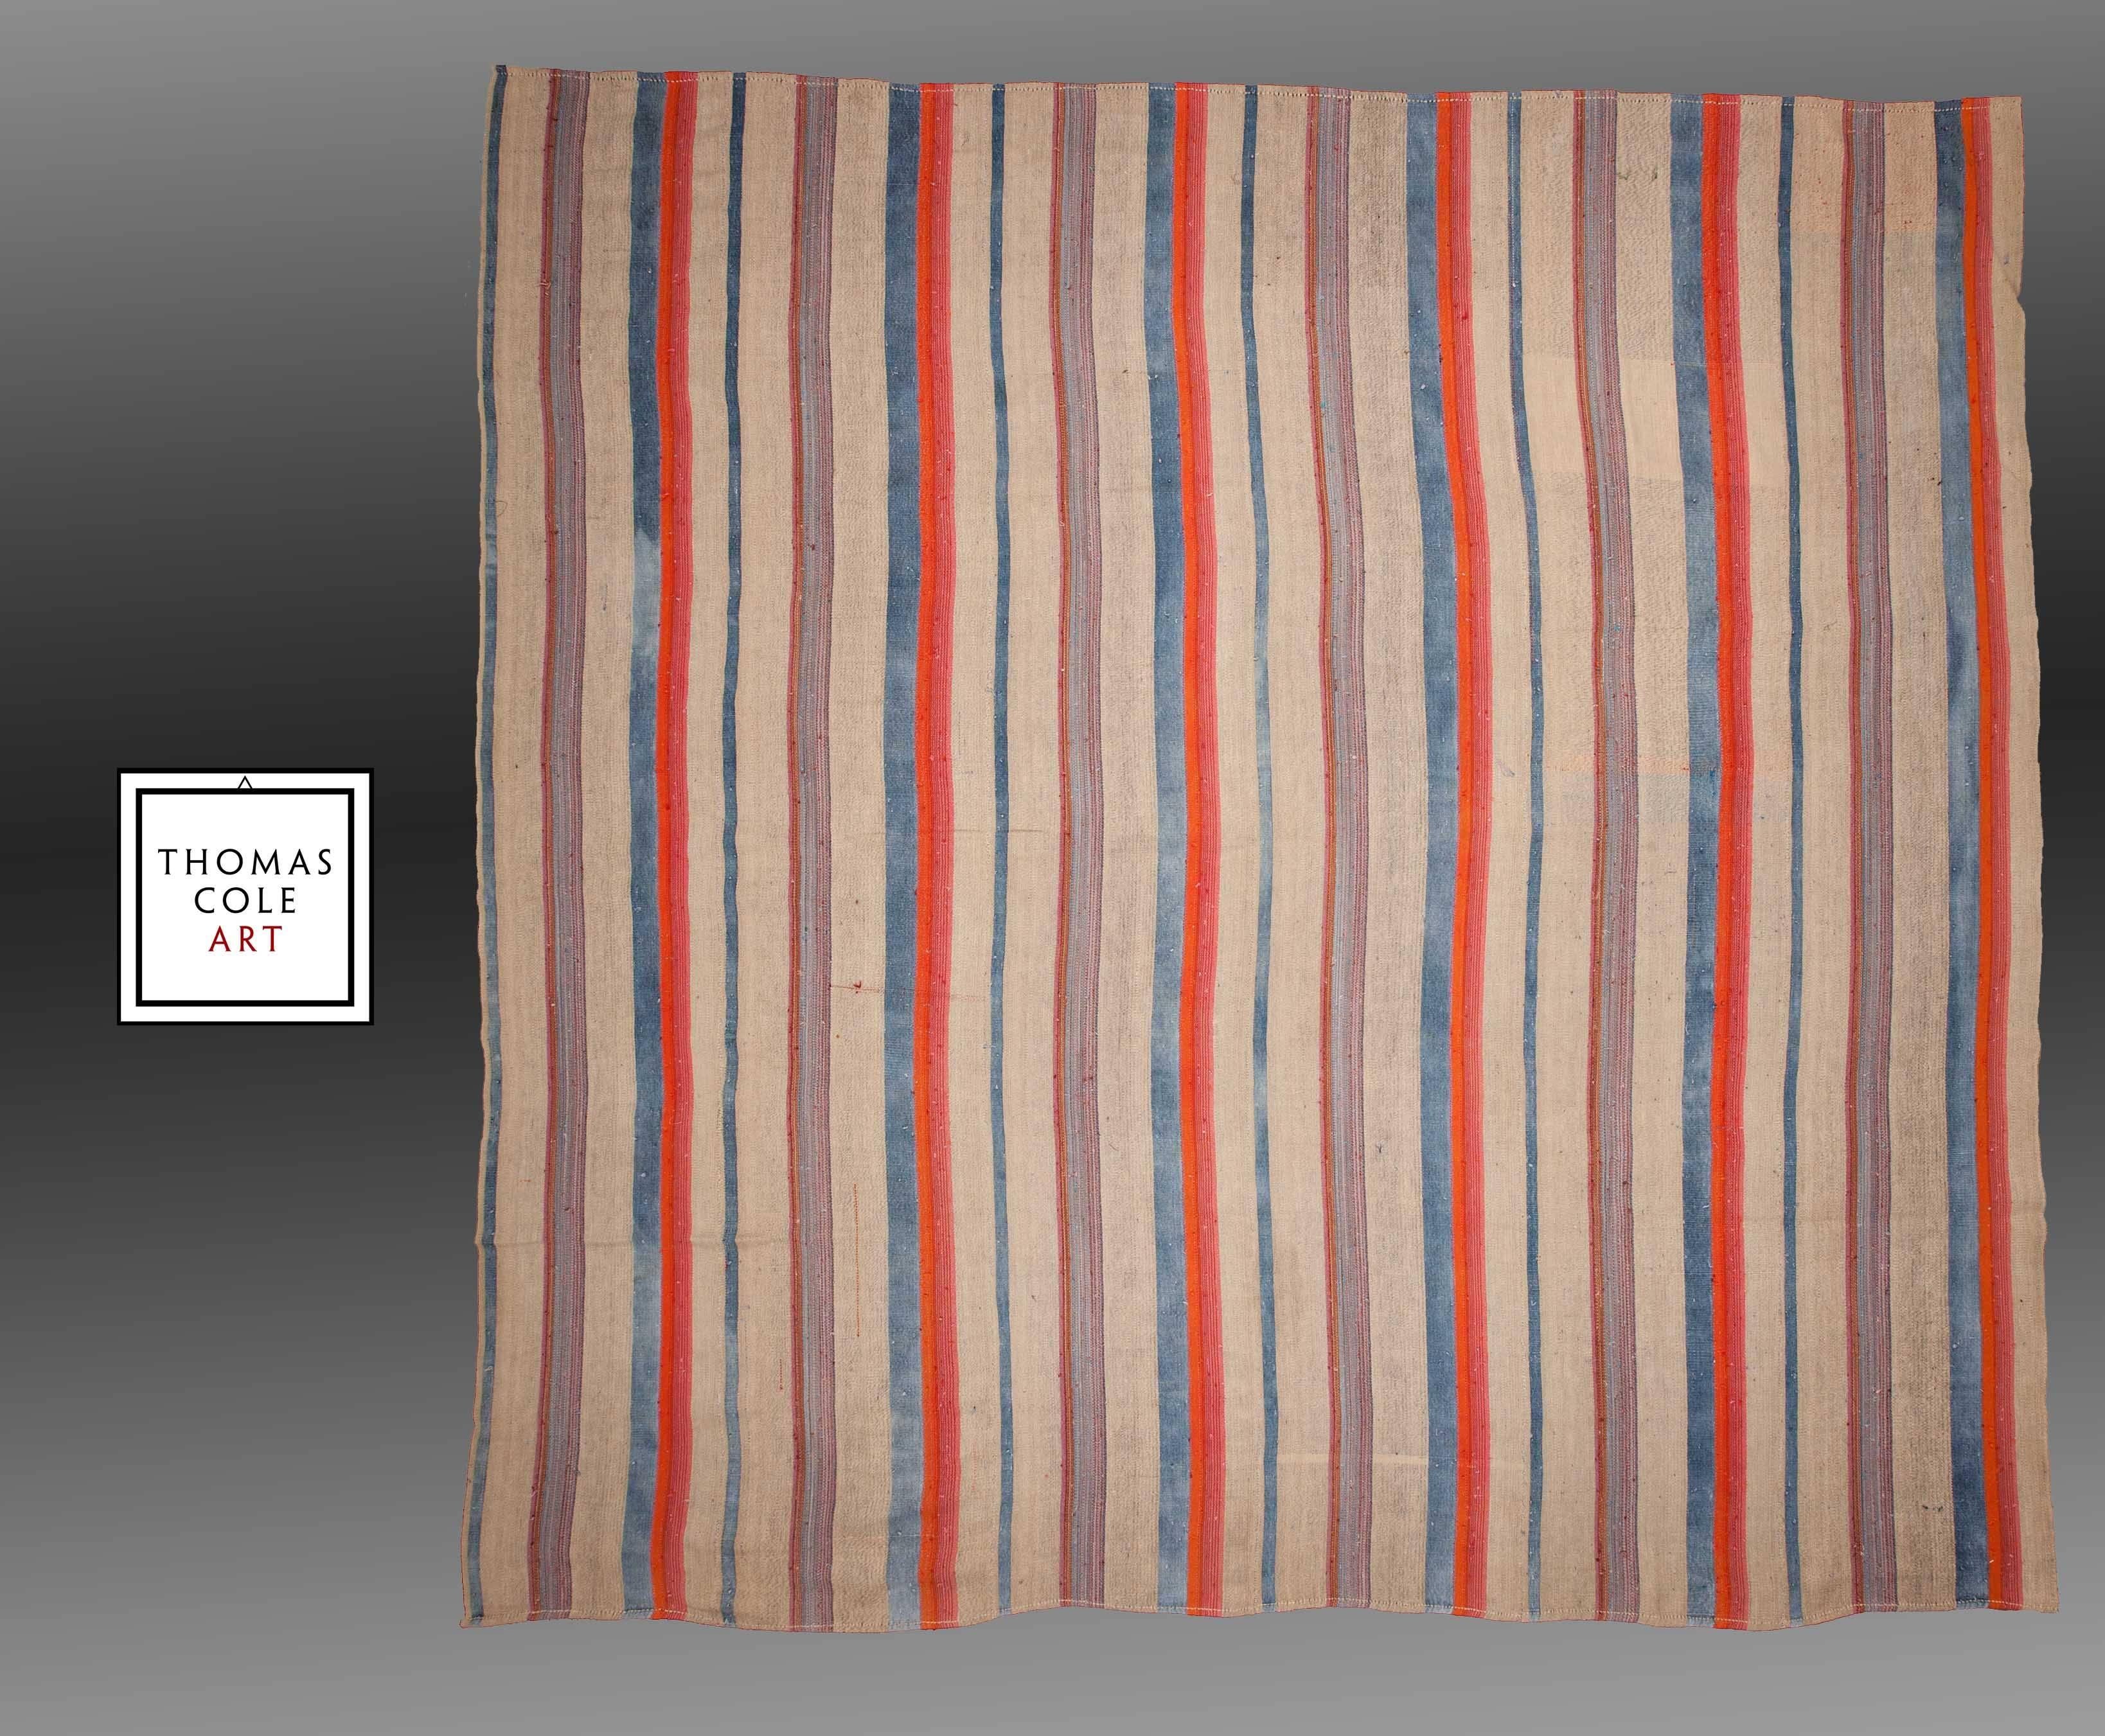 A large Turkish flat-weave made in southern Turkey, composed of both cotton and wool, a rare combination. The off-white/brown is cotton, while the light blues, red and orange colors are composed of wool. 

It is in good condition with no holes or